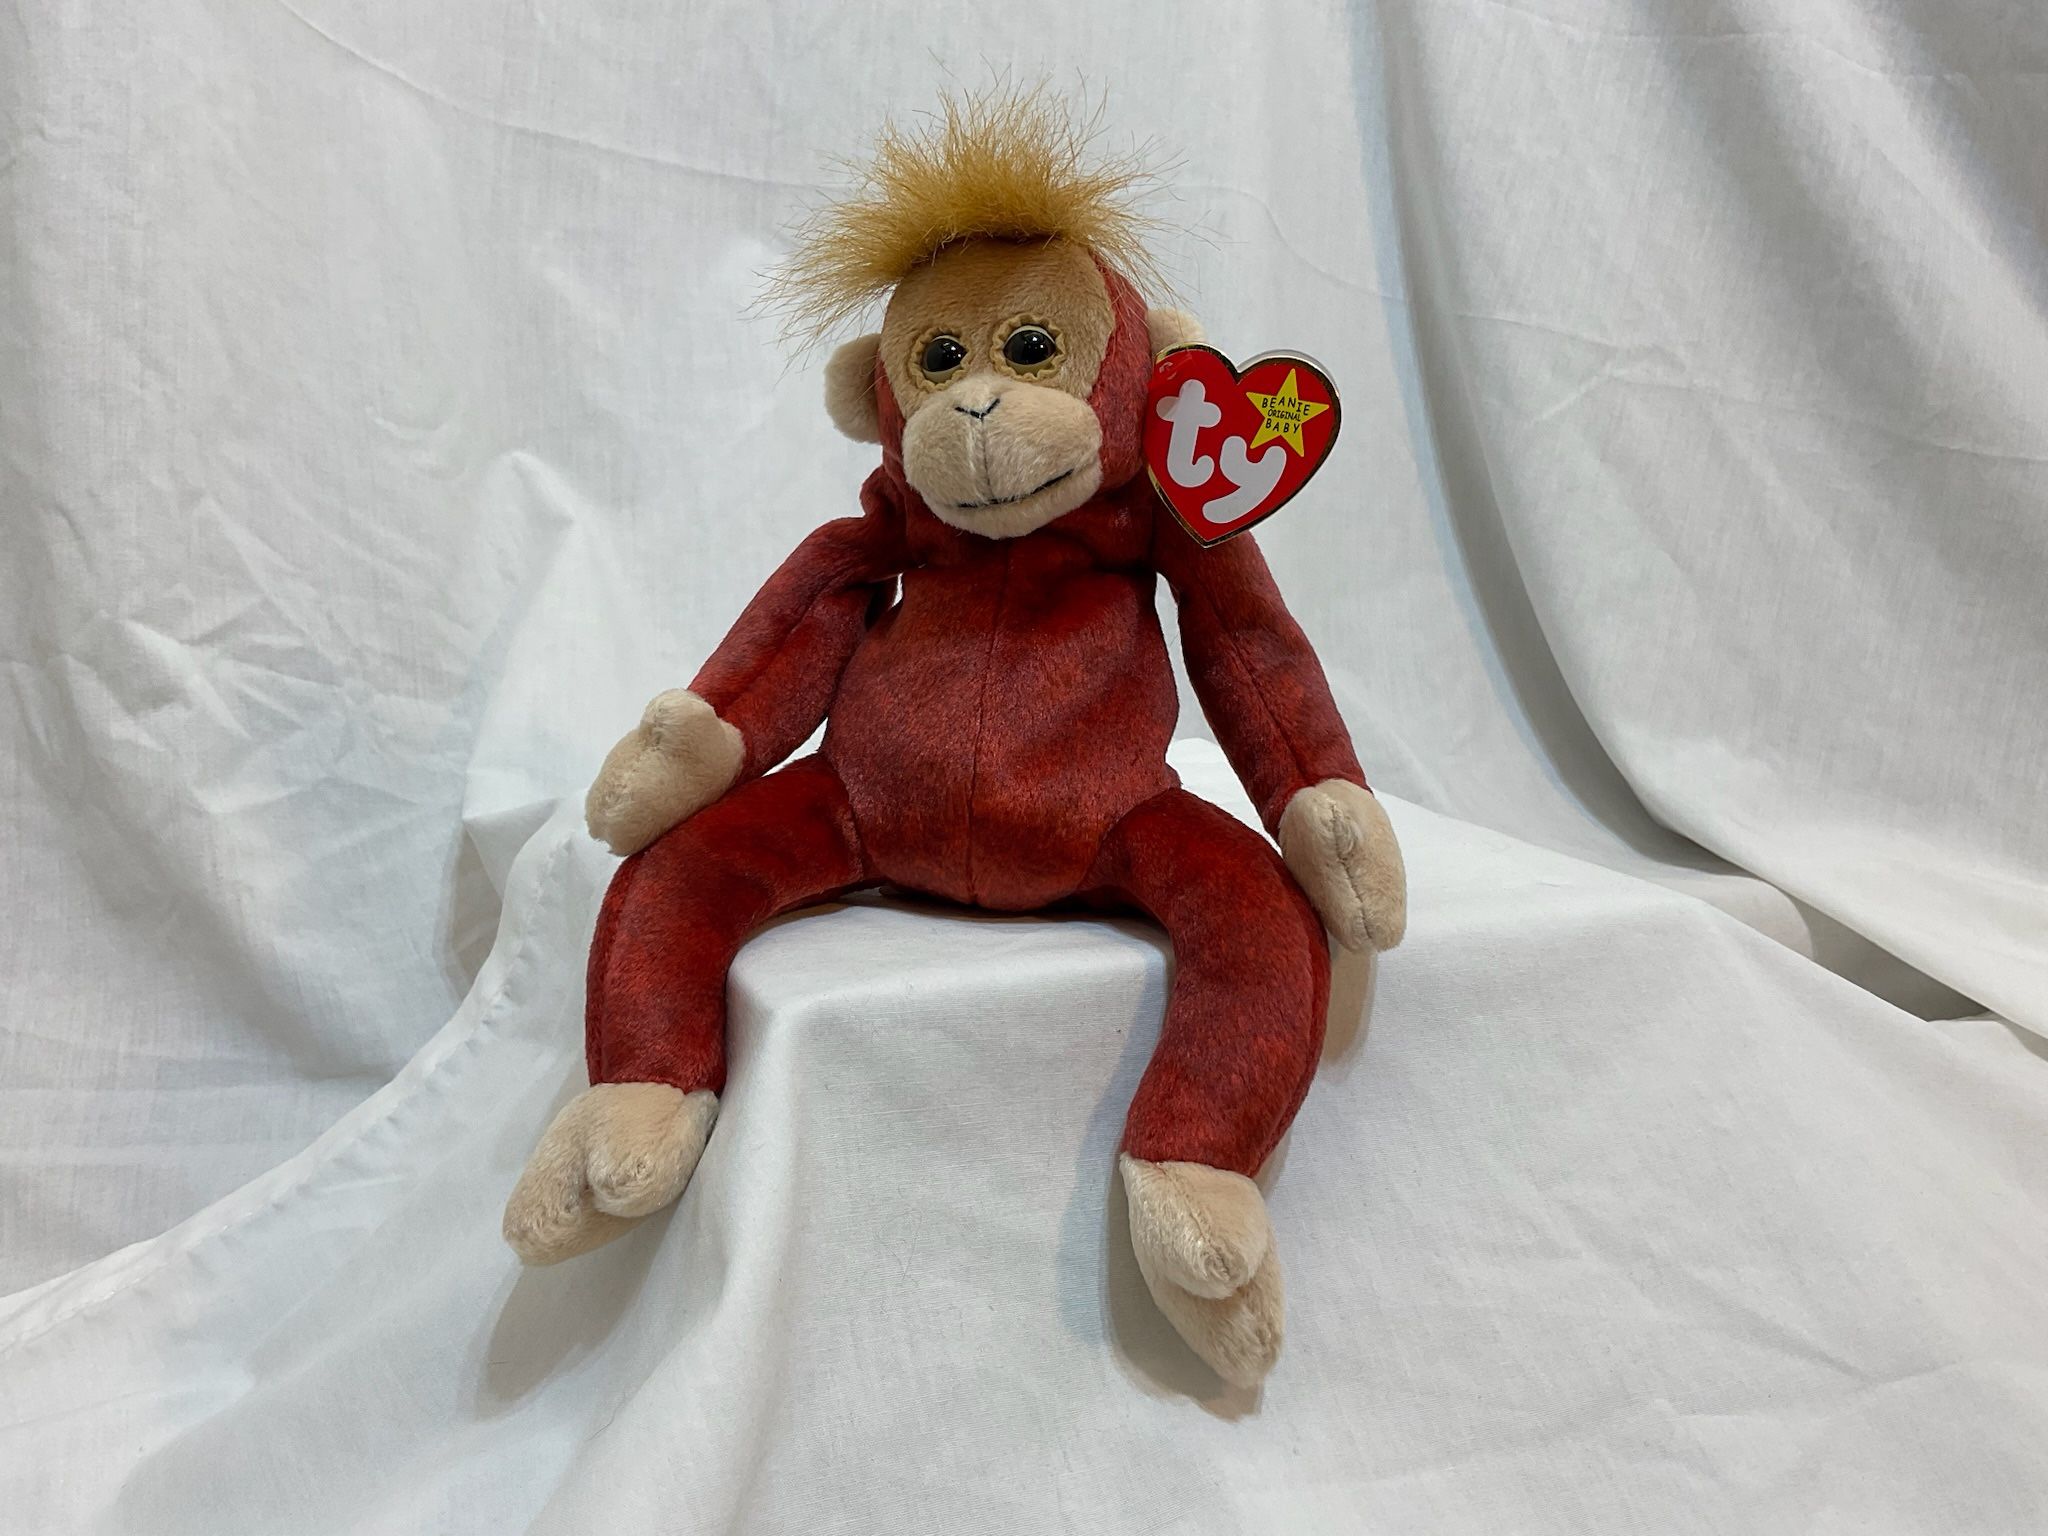 Collectable Beanie Baby Schweetheart With Errors